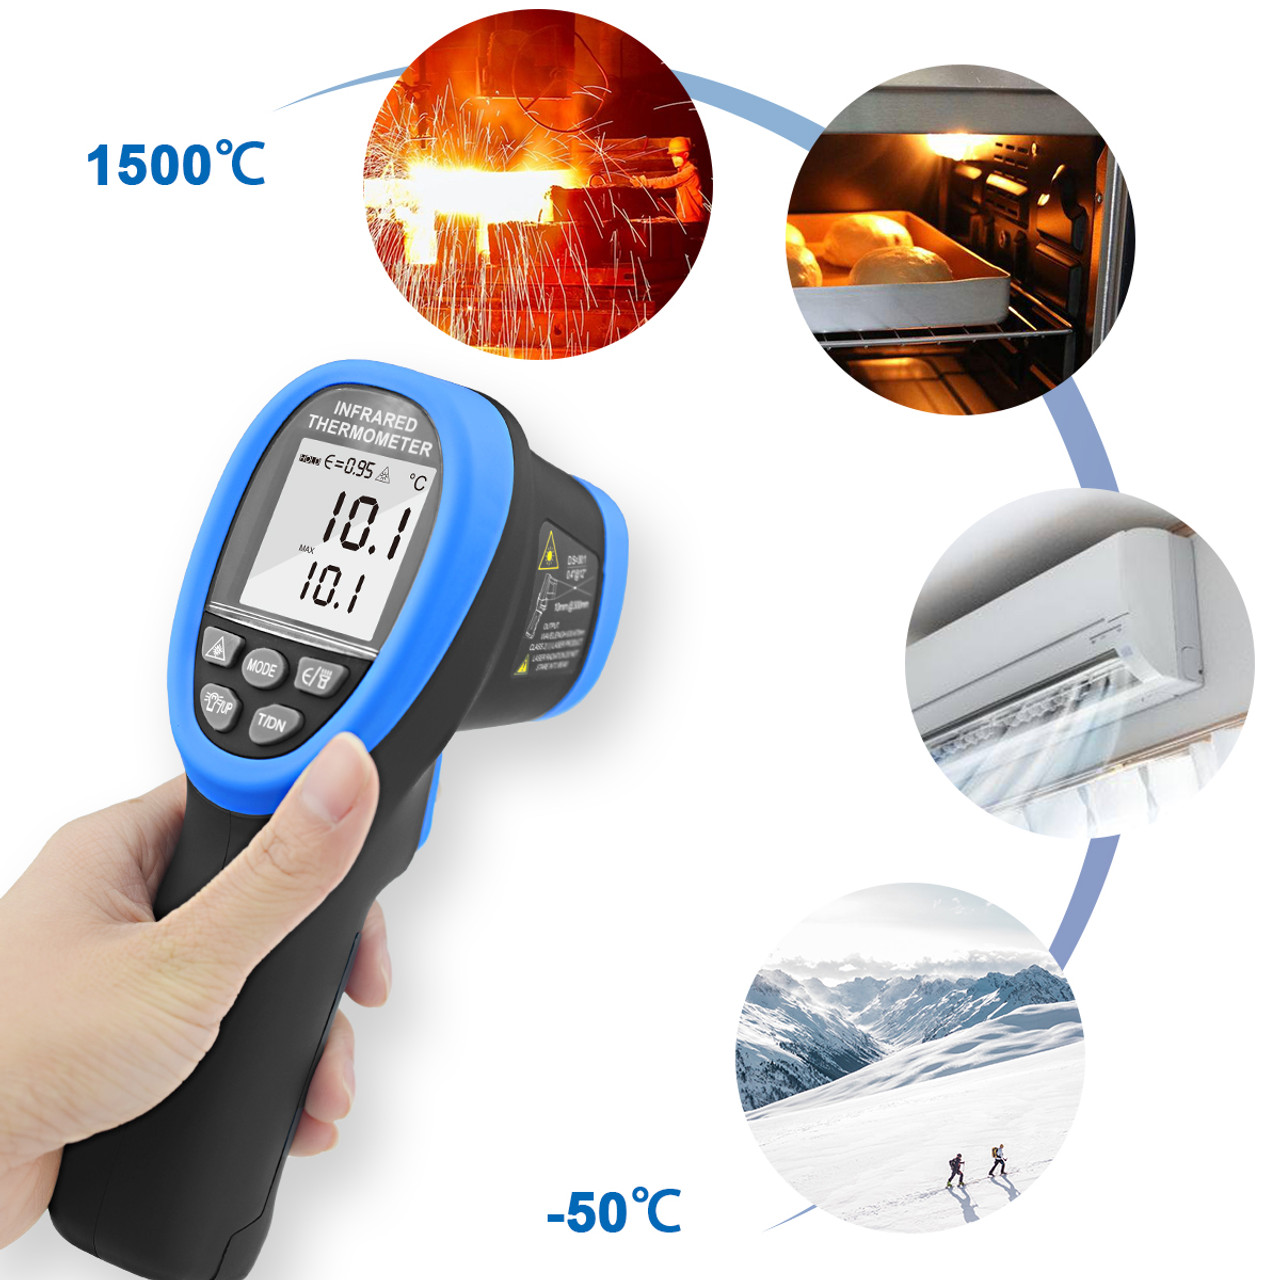 HP-1600 Non-contact infrared thermometer safely measure the